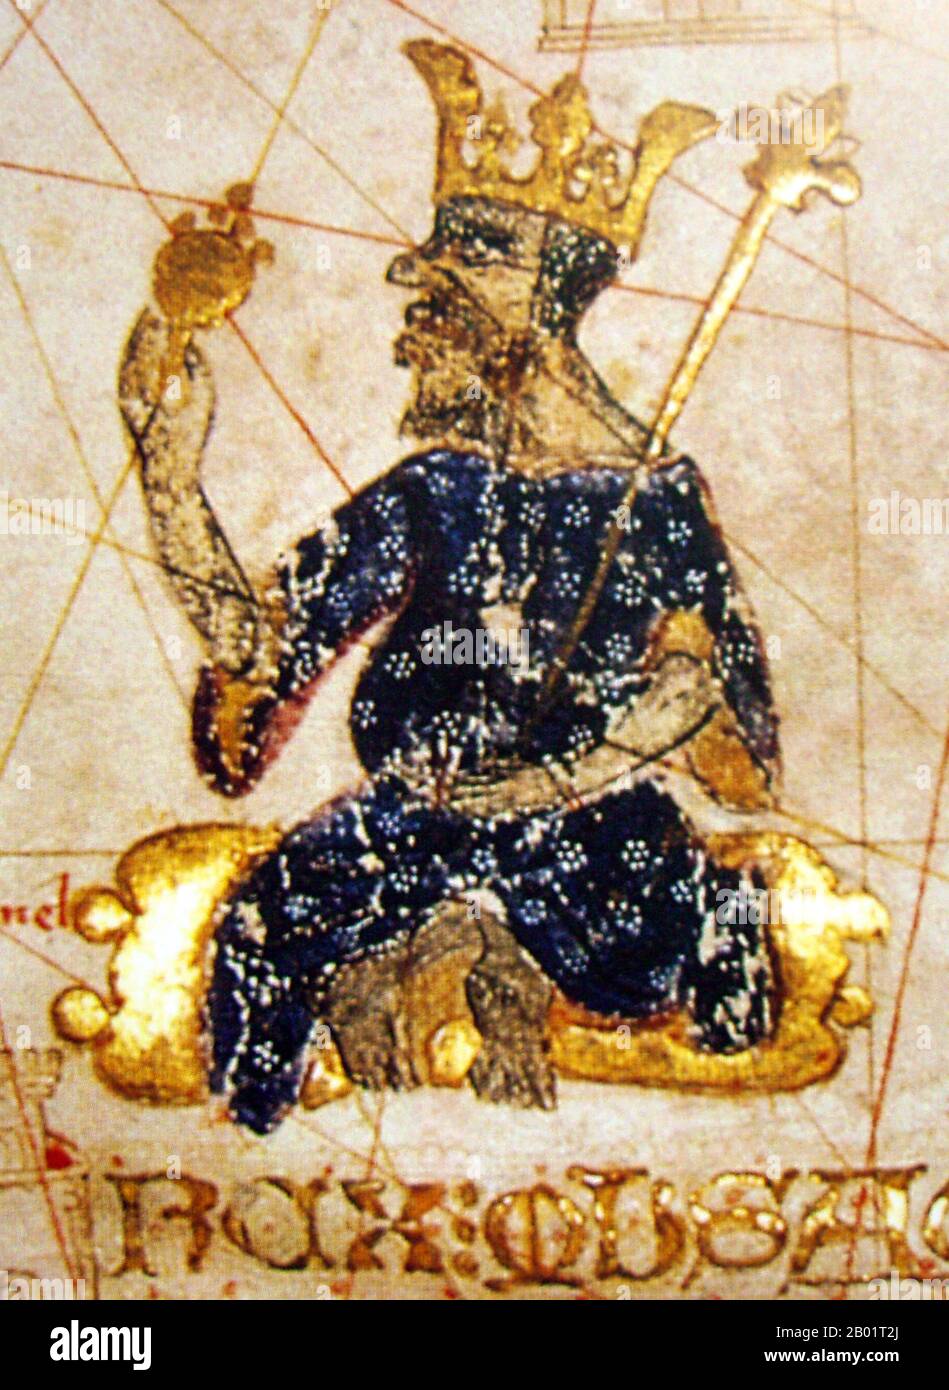 Mali: Mansa Musa (c. 1280-1337), King of Mali, holding a sceptre and a piece of gold. Detail from the Catalan Atlas by Abraham Cresques, 1375.  Musa I, commonly referred to as Mansa Musa, was the tenth mansa, which translates as 'king of kings' or 'emperor', of the Malian Empire. At the time of Mansa Musa's rise to the throne, the Malian Empire consisted of territory formerly belonging to the Ghana Empire and Melle (Mali) and immediate surrounding areas. Musa held many titles, including Emir of Melle, Lord of the Mines of Wangara, and conqueror of Ghanata, Futa-Jallon and a dozen more states. Stock Photo